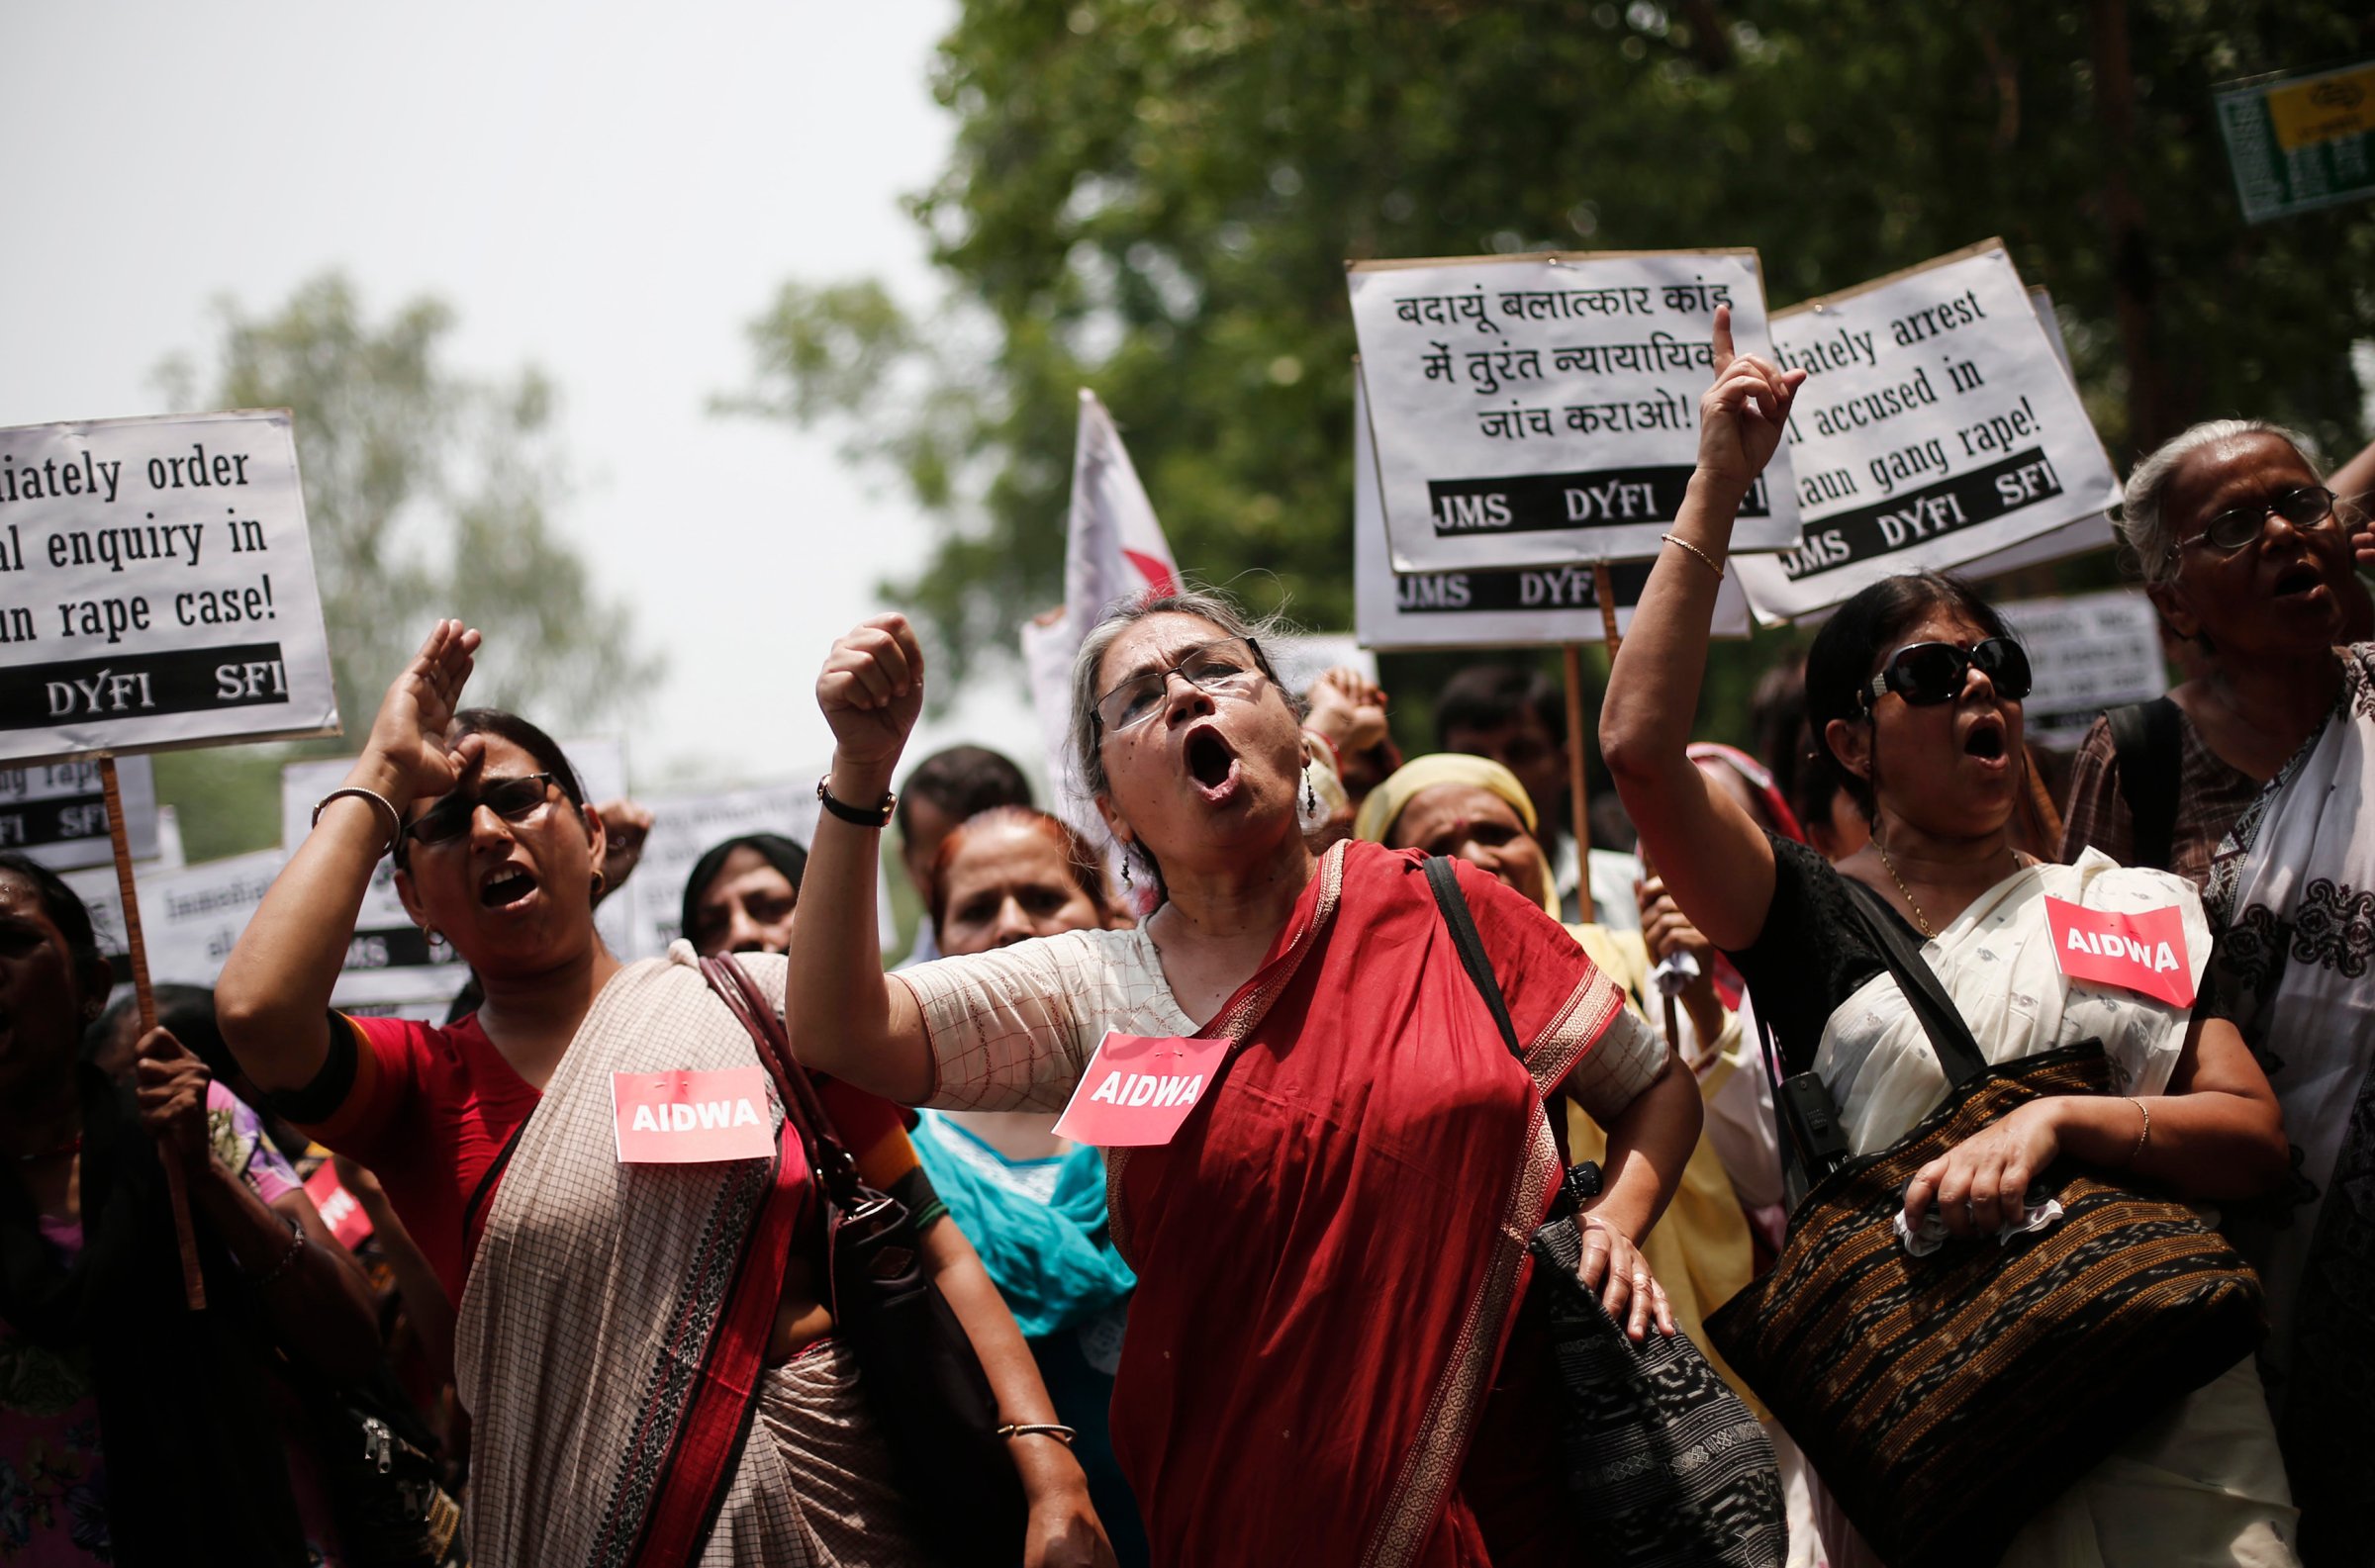 Demonstrators from All India Democratic Women's Association hold placards and shout slogans during protest against recent killings of two teenage girls, in New Delhi